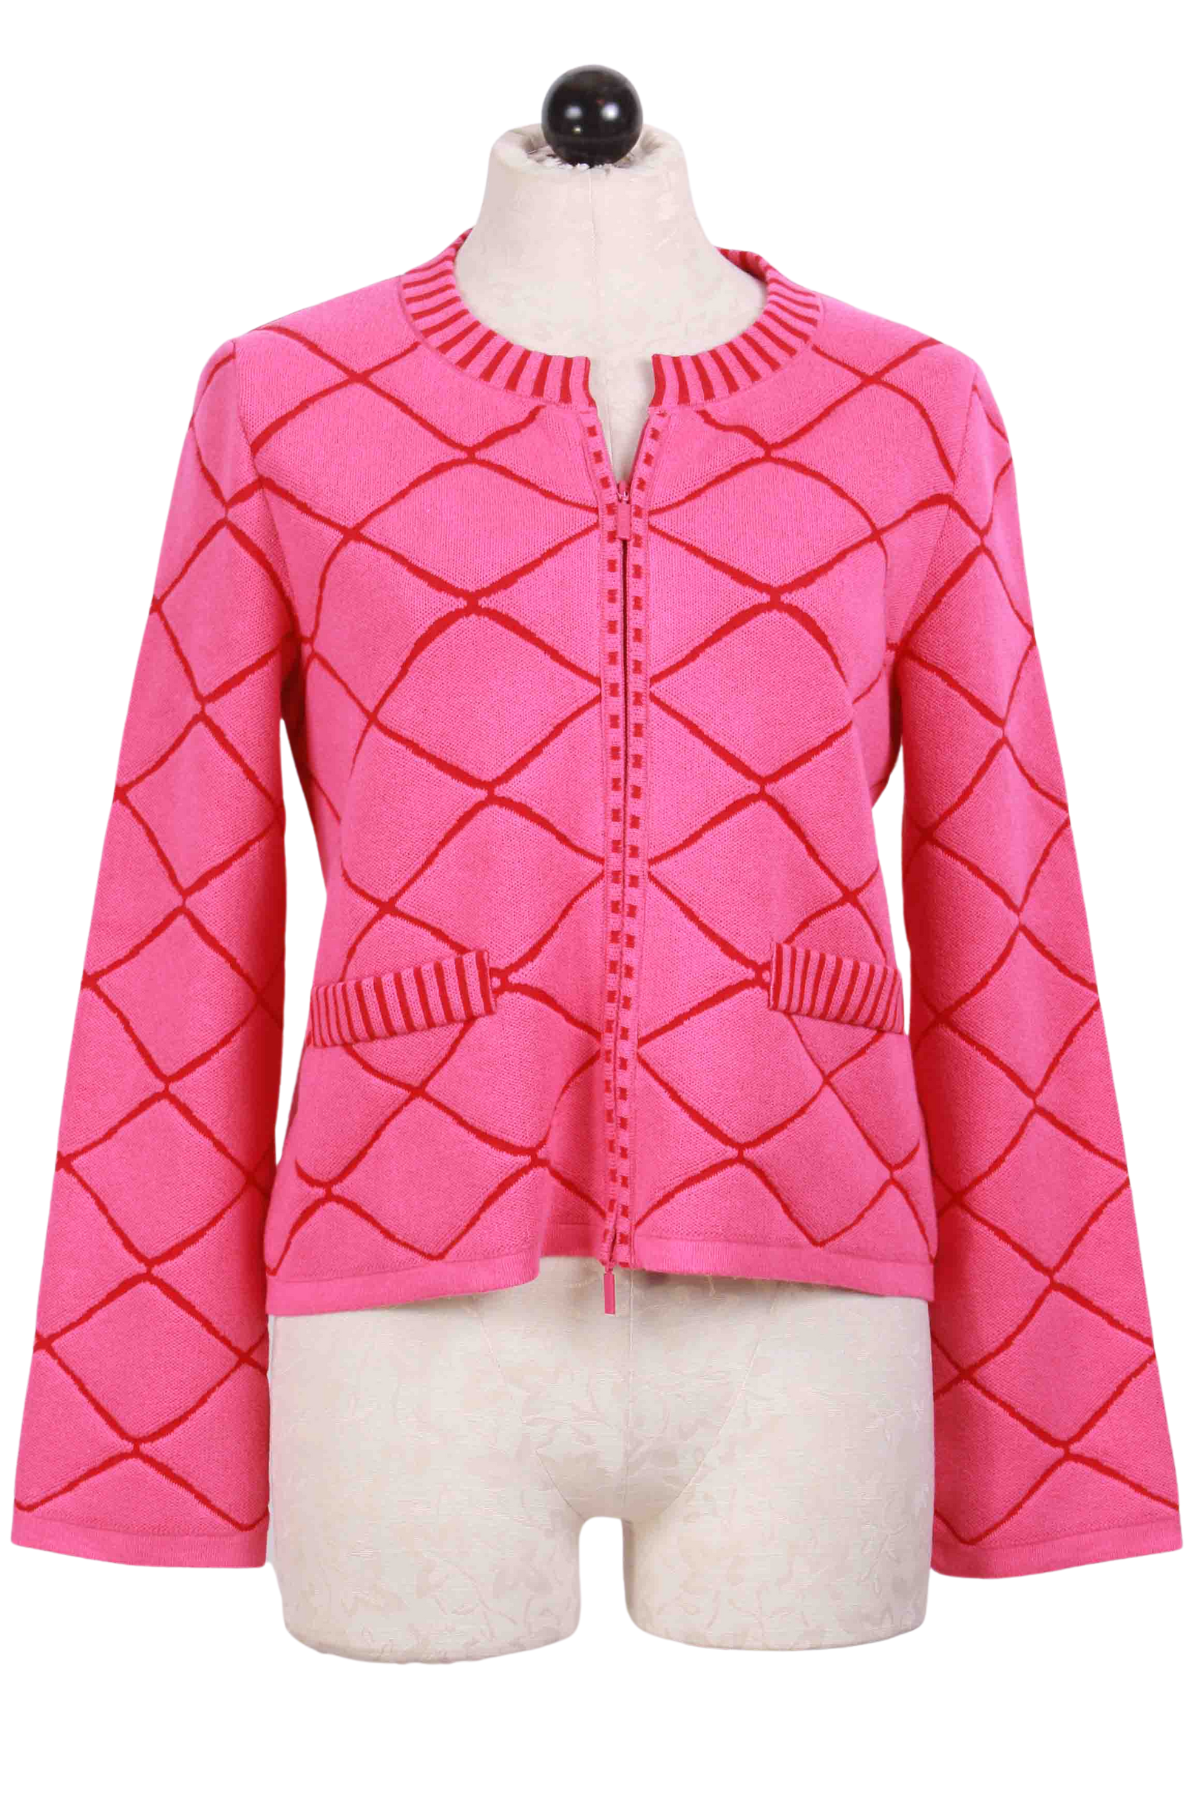 Pink and Red Structure Pattern Zip Front Jacket by Ivko